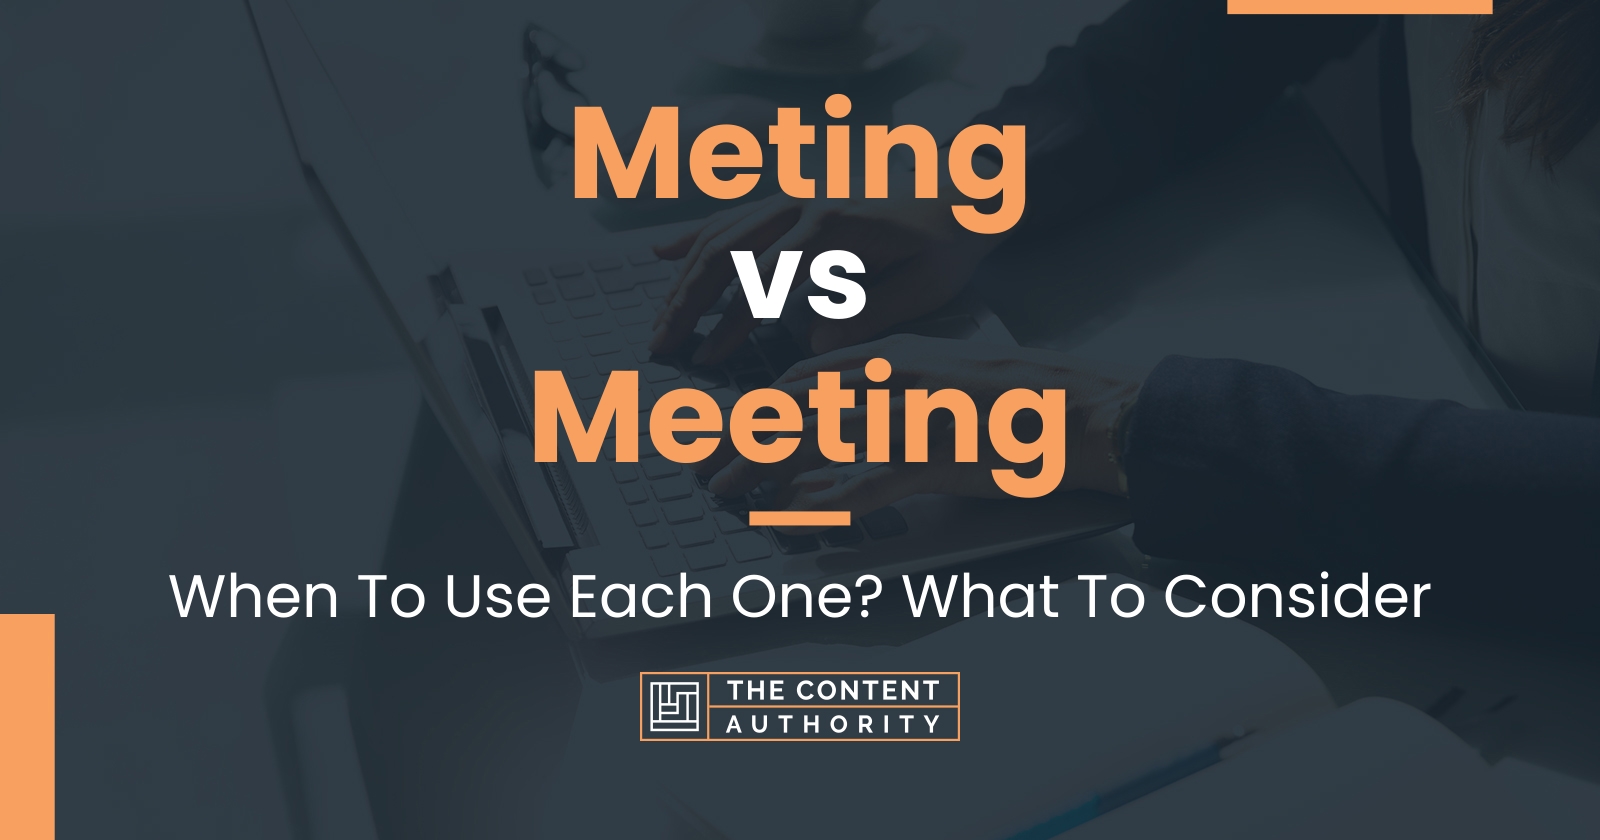 Meting vs Meeting: When To Use Each One? What To Consider